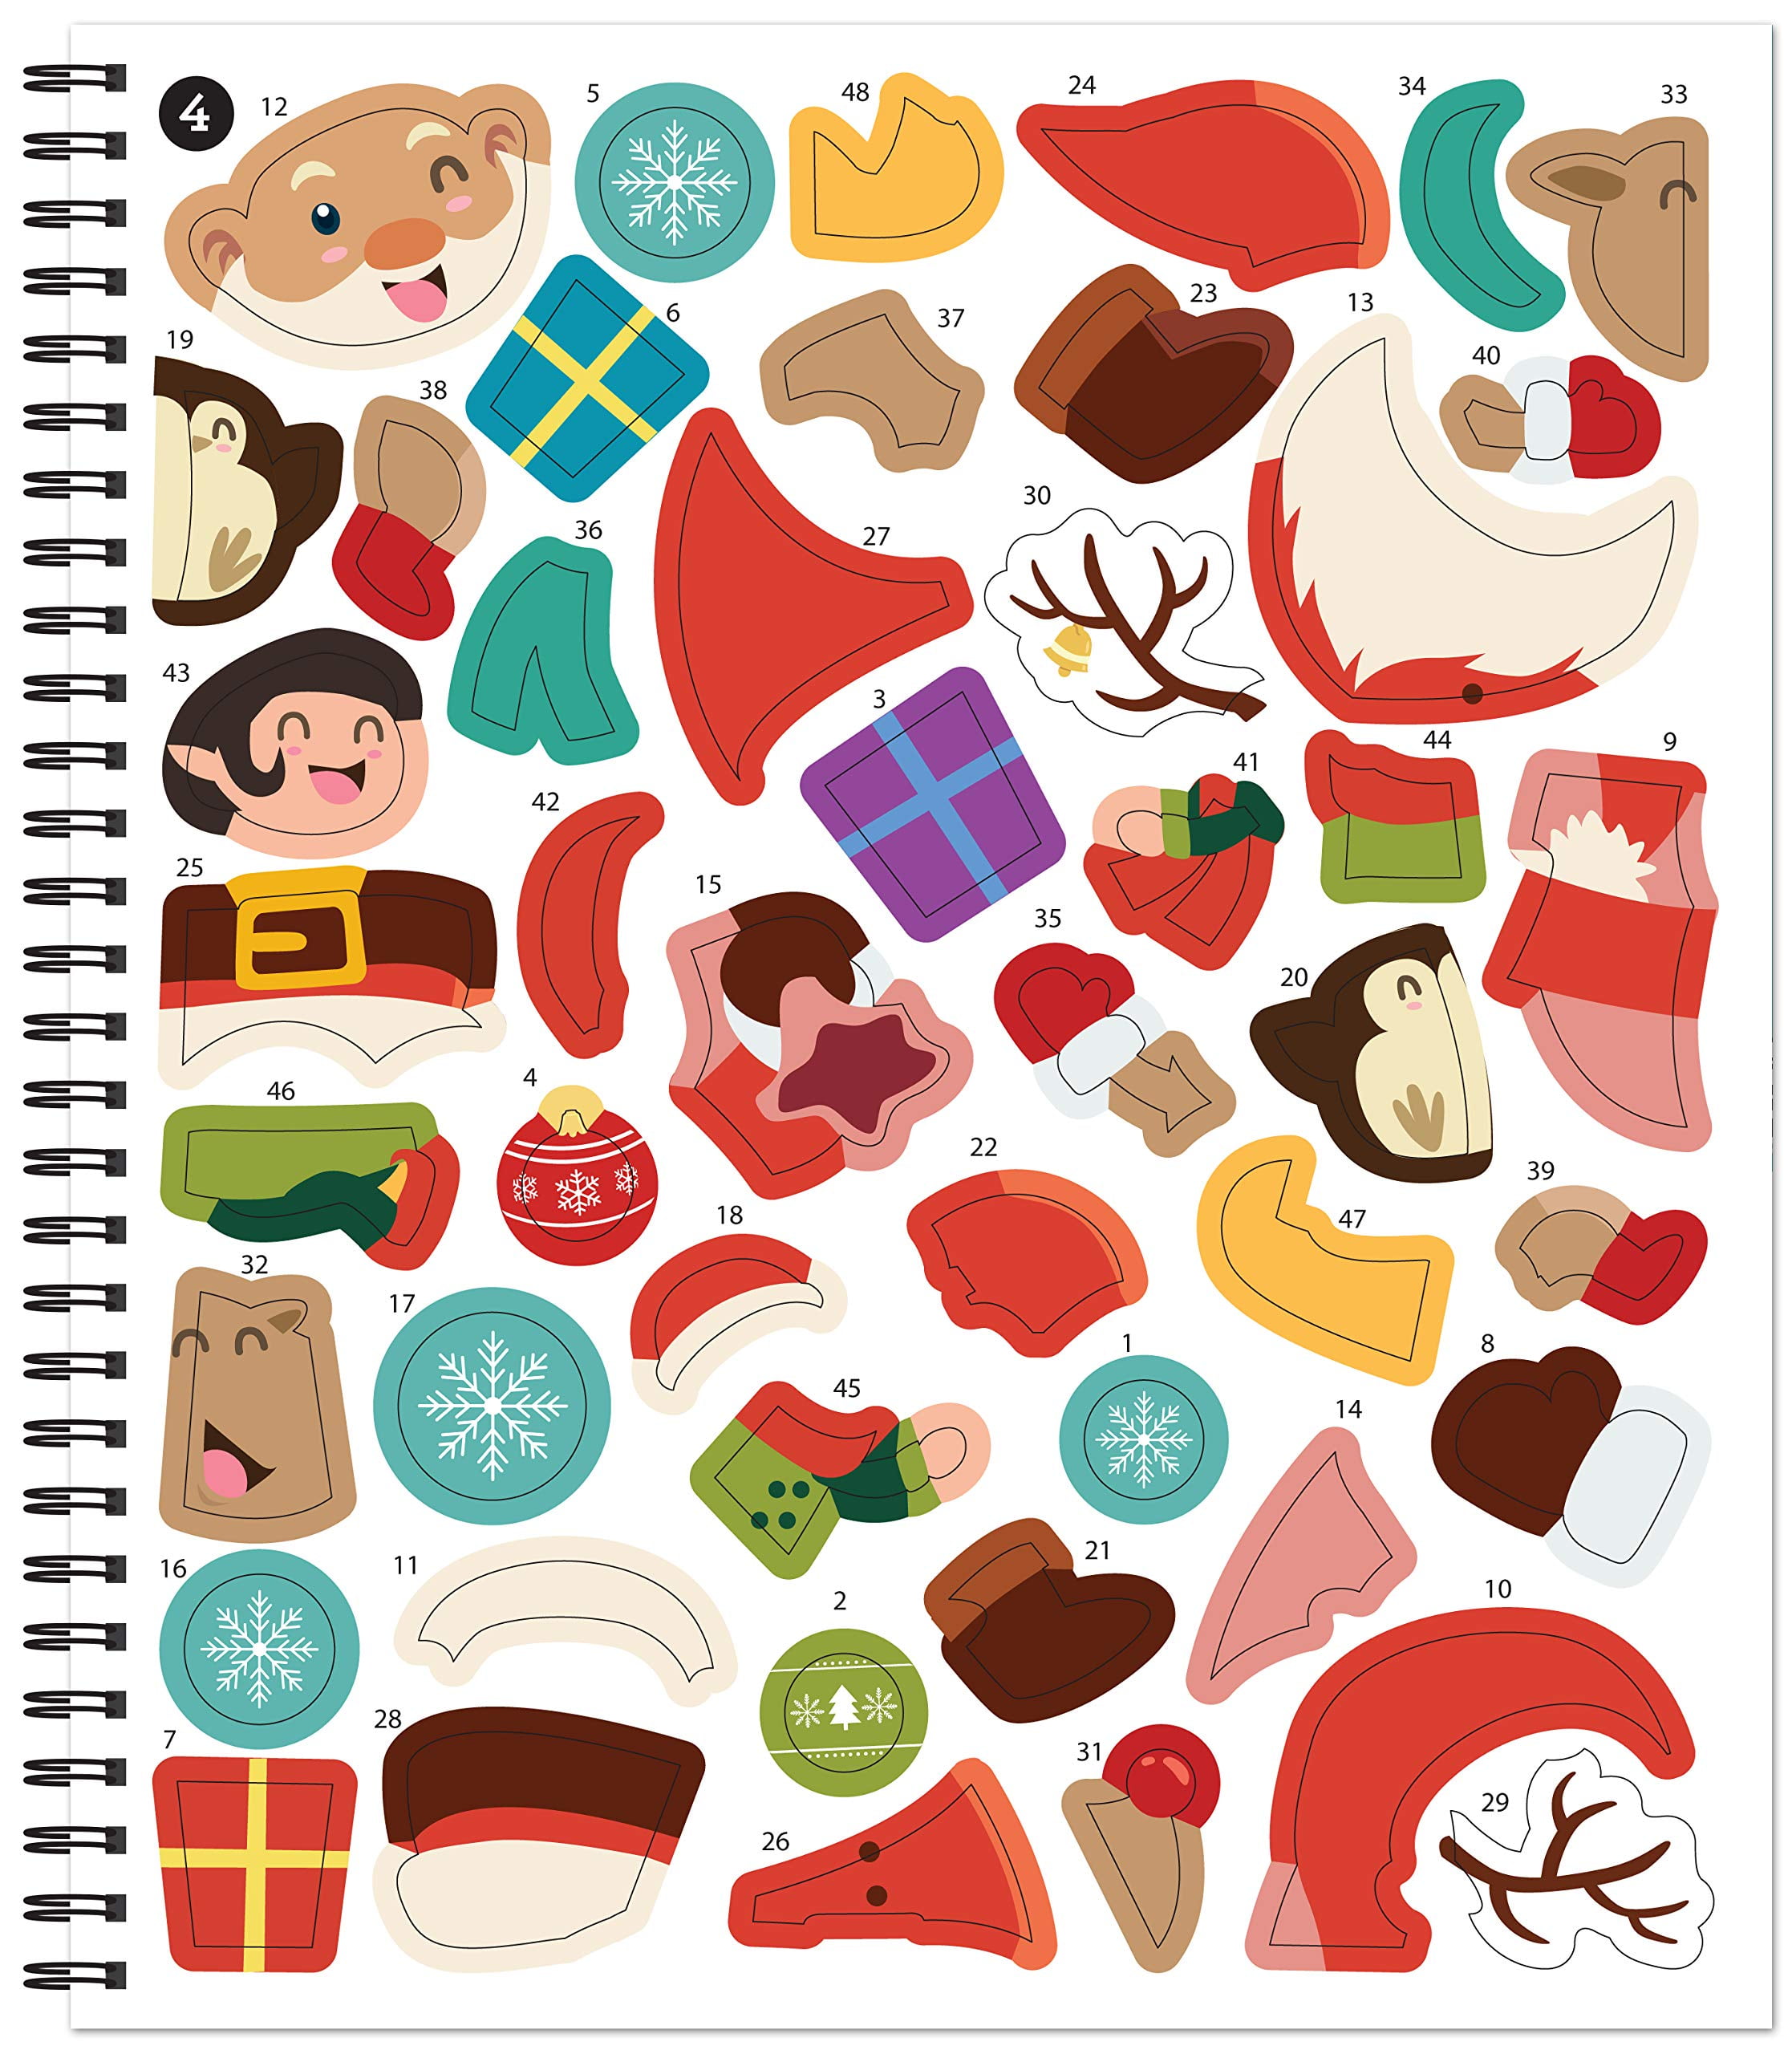 Christmas Sticker by Number (My Very First Sticker by Number) Holiday –  Emerson and Friends